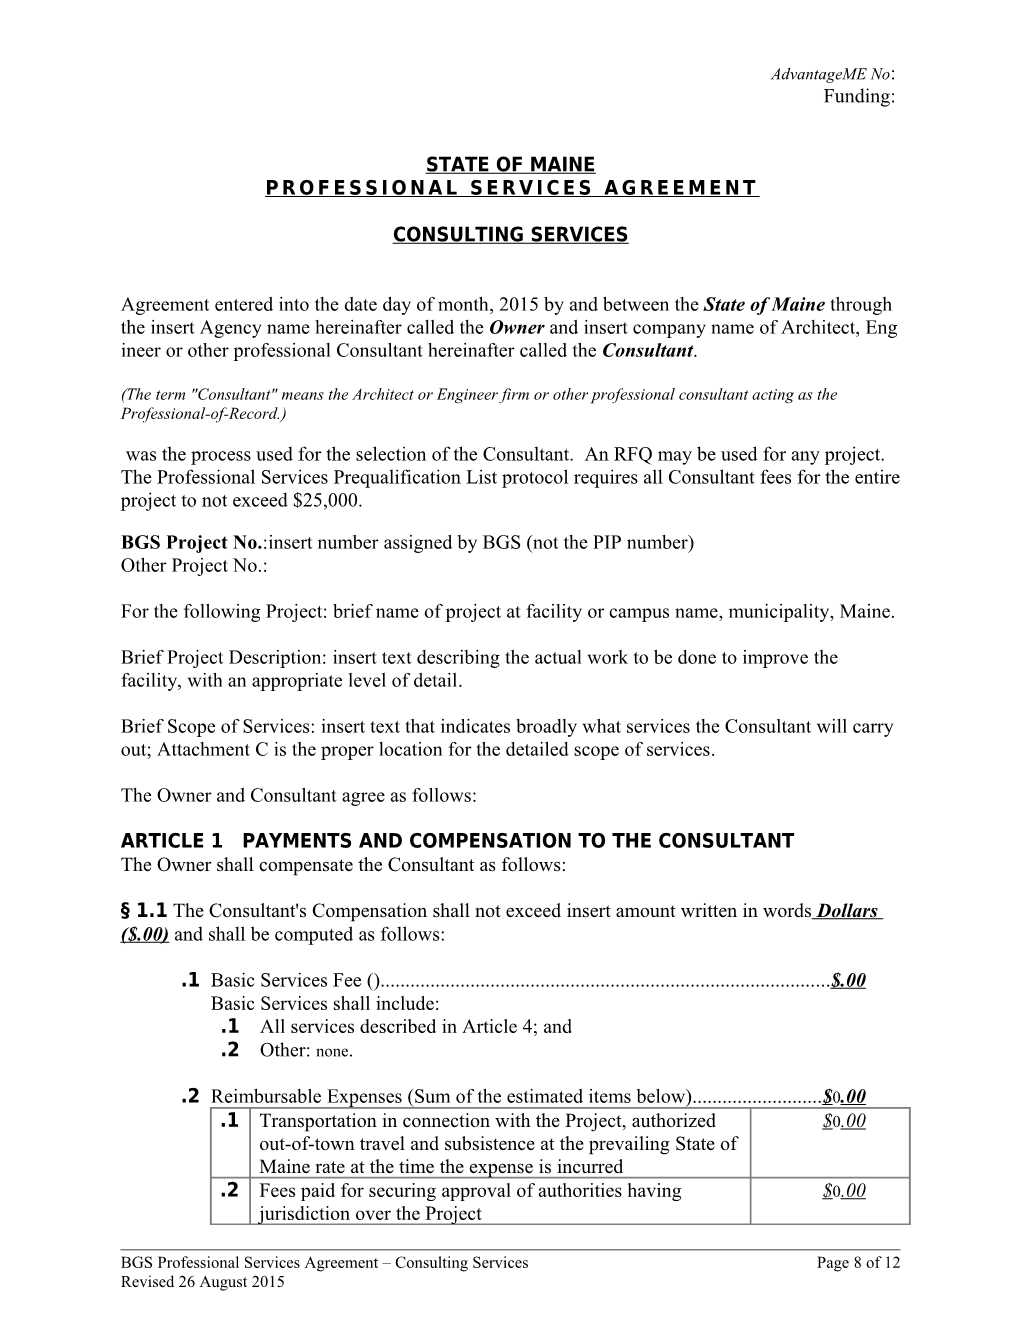 Professional Services Agreement s3